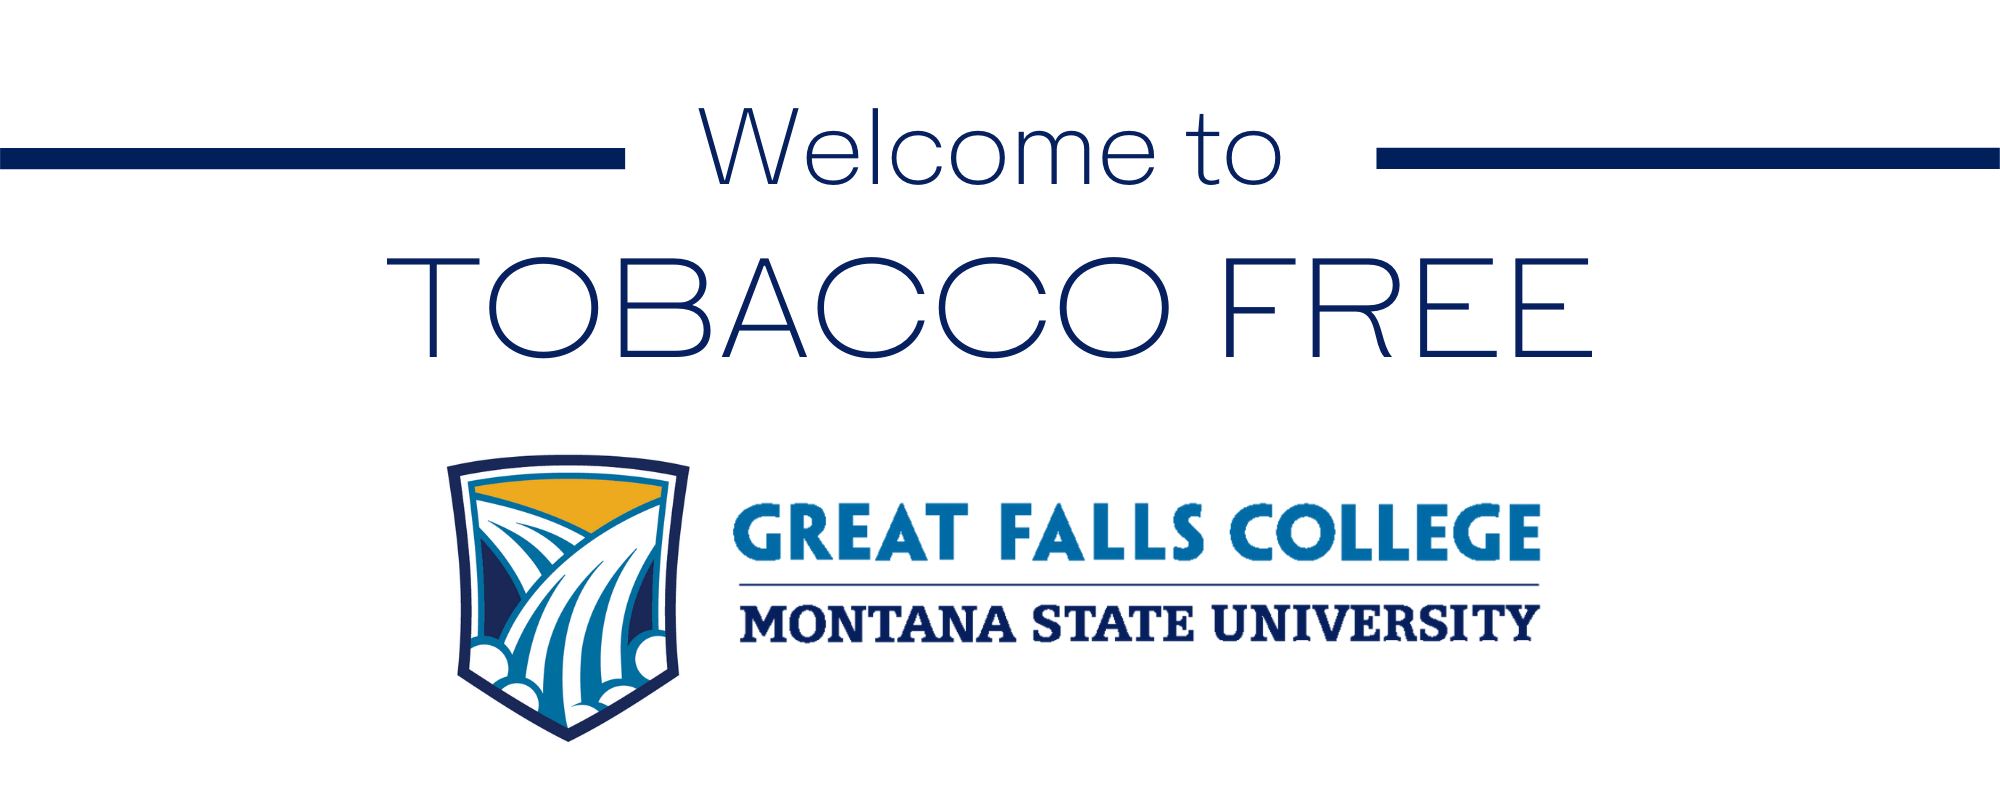 Welcome to Tobacco Free Great Falls College MSU